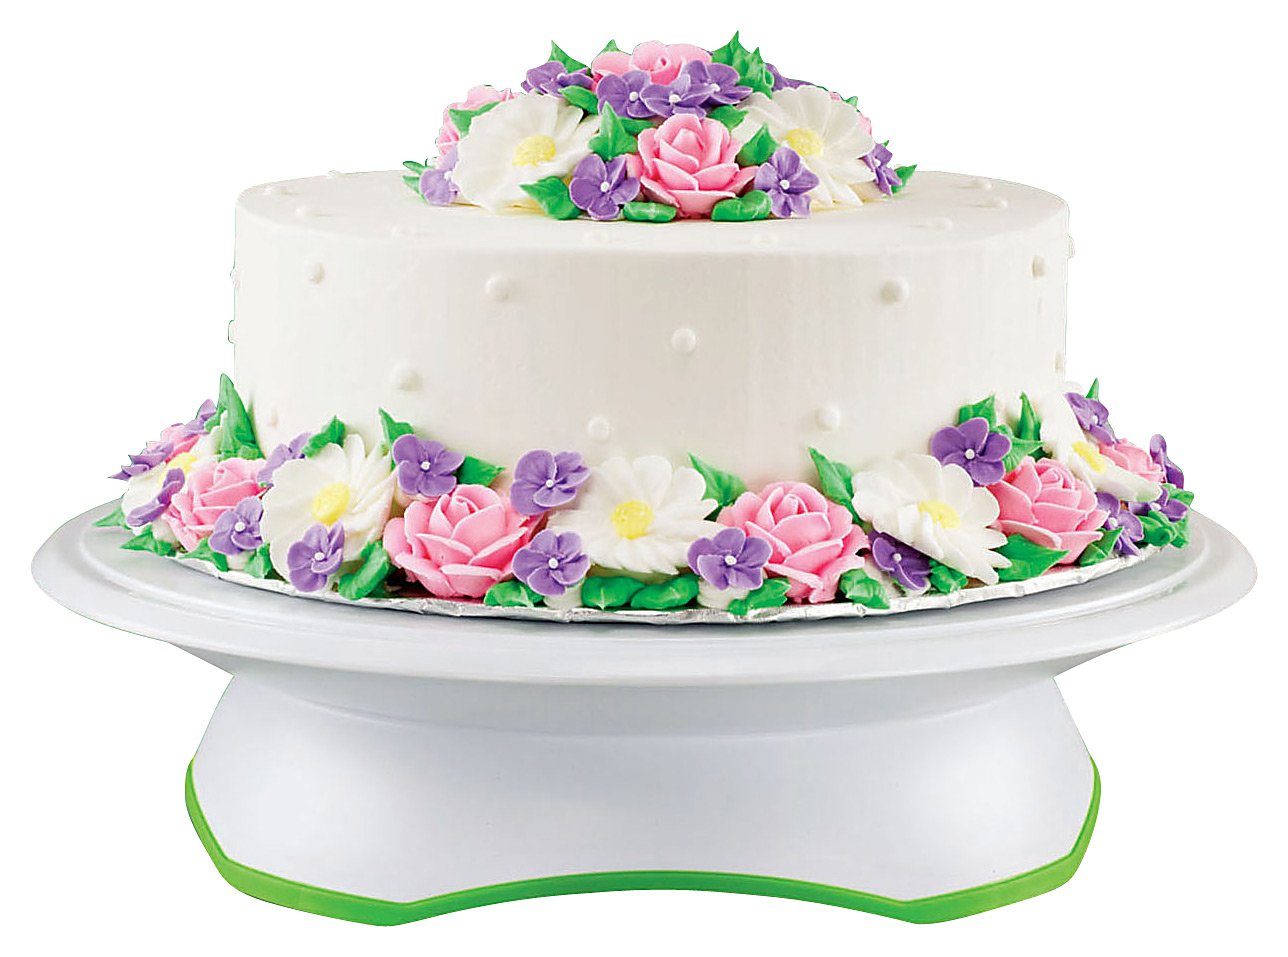 Review of Wilton Trim-N-Turn Ultra Rotating Cake Stand